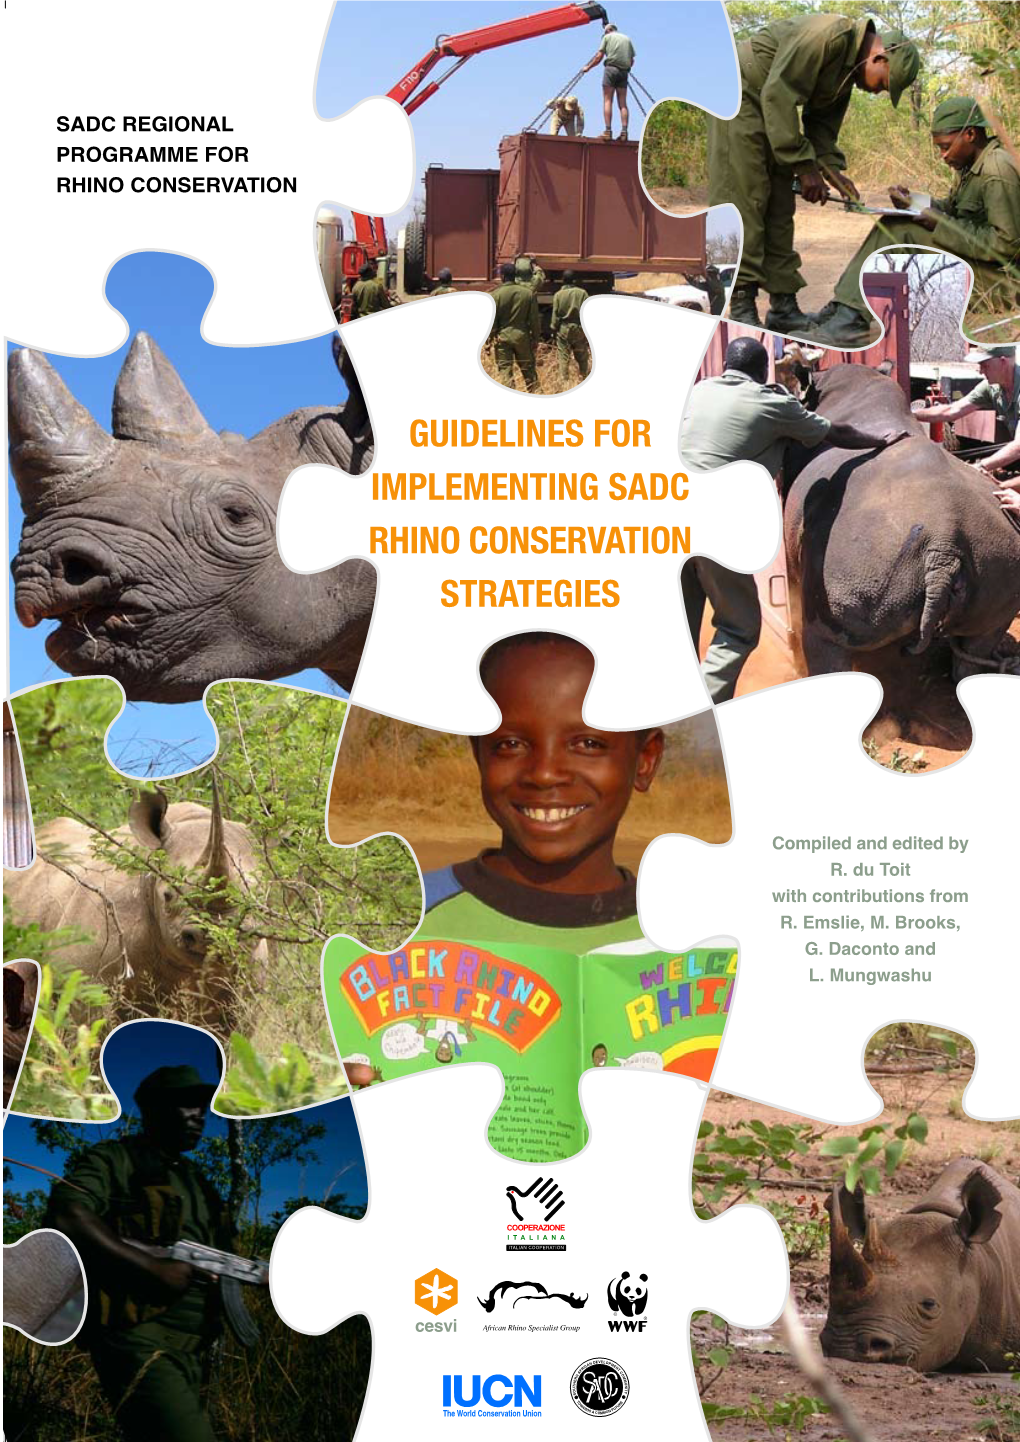 Guidelines for Implementing Sadc Rhino Conservation Strategies